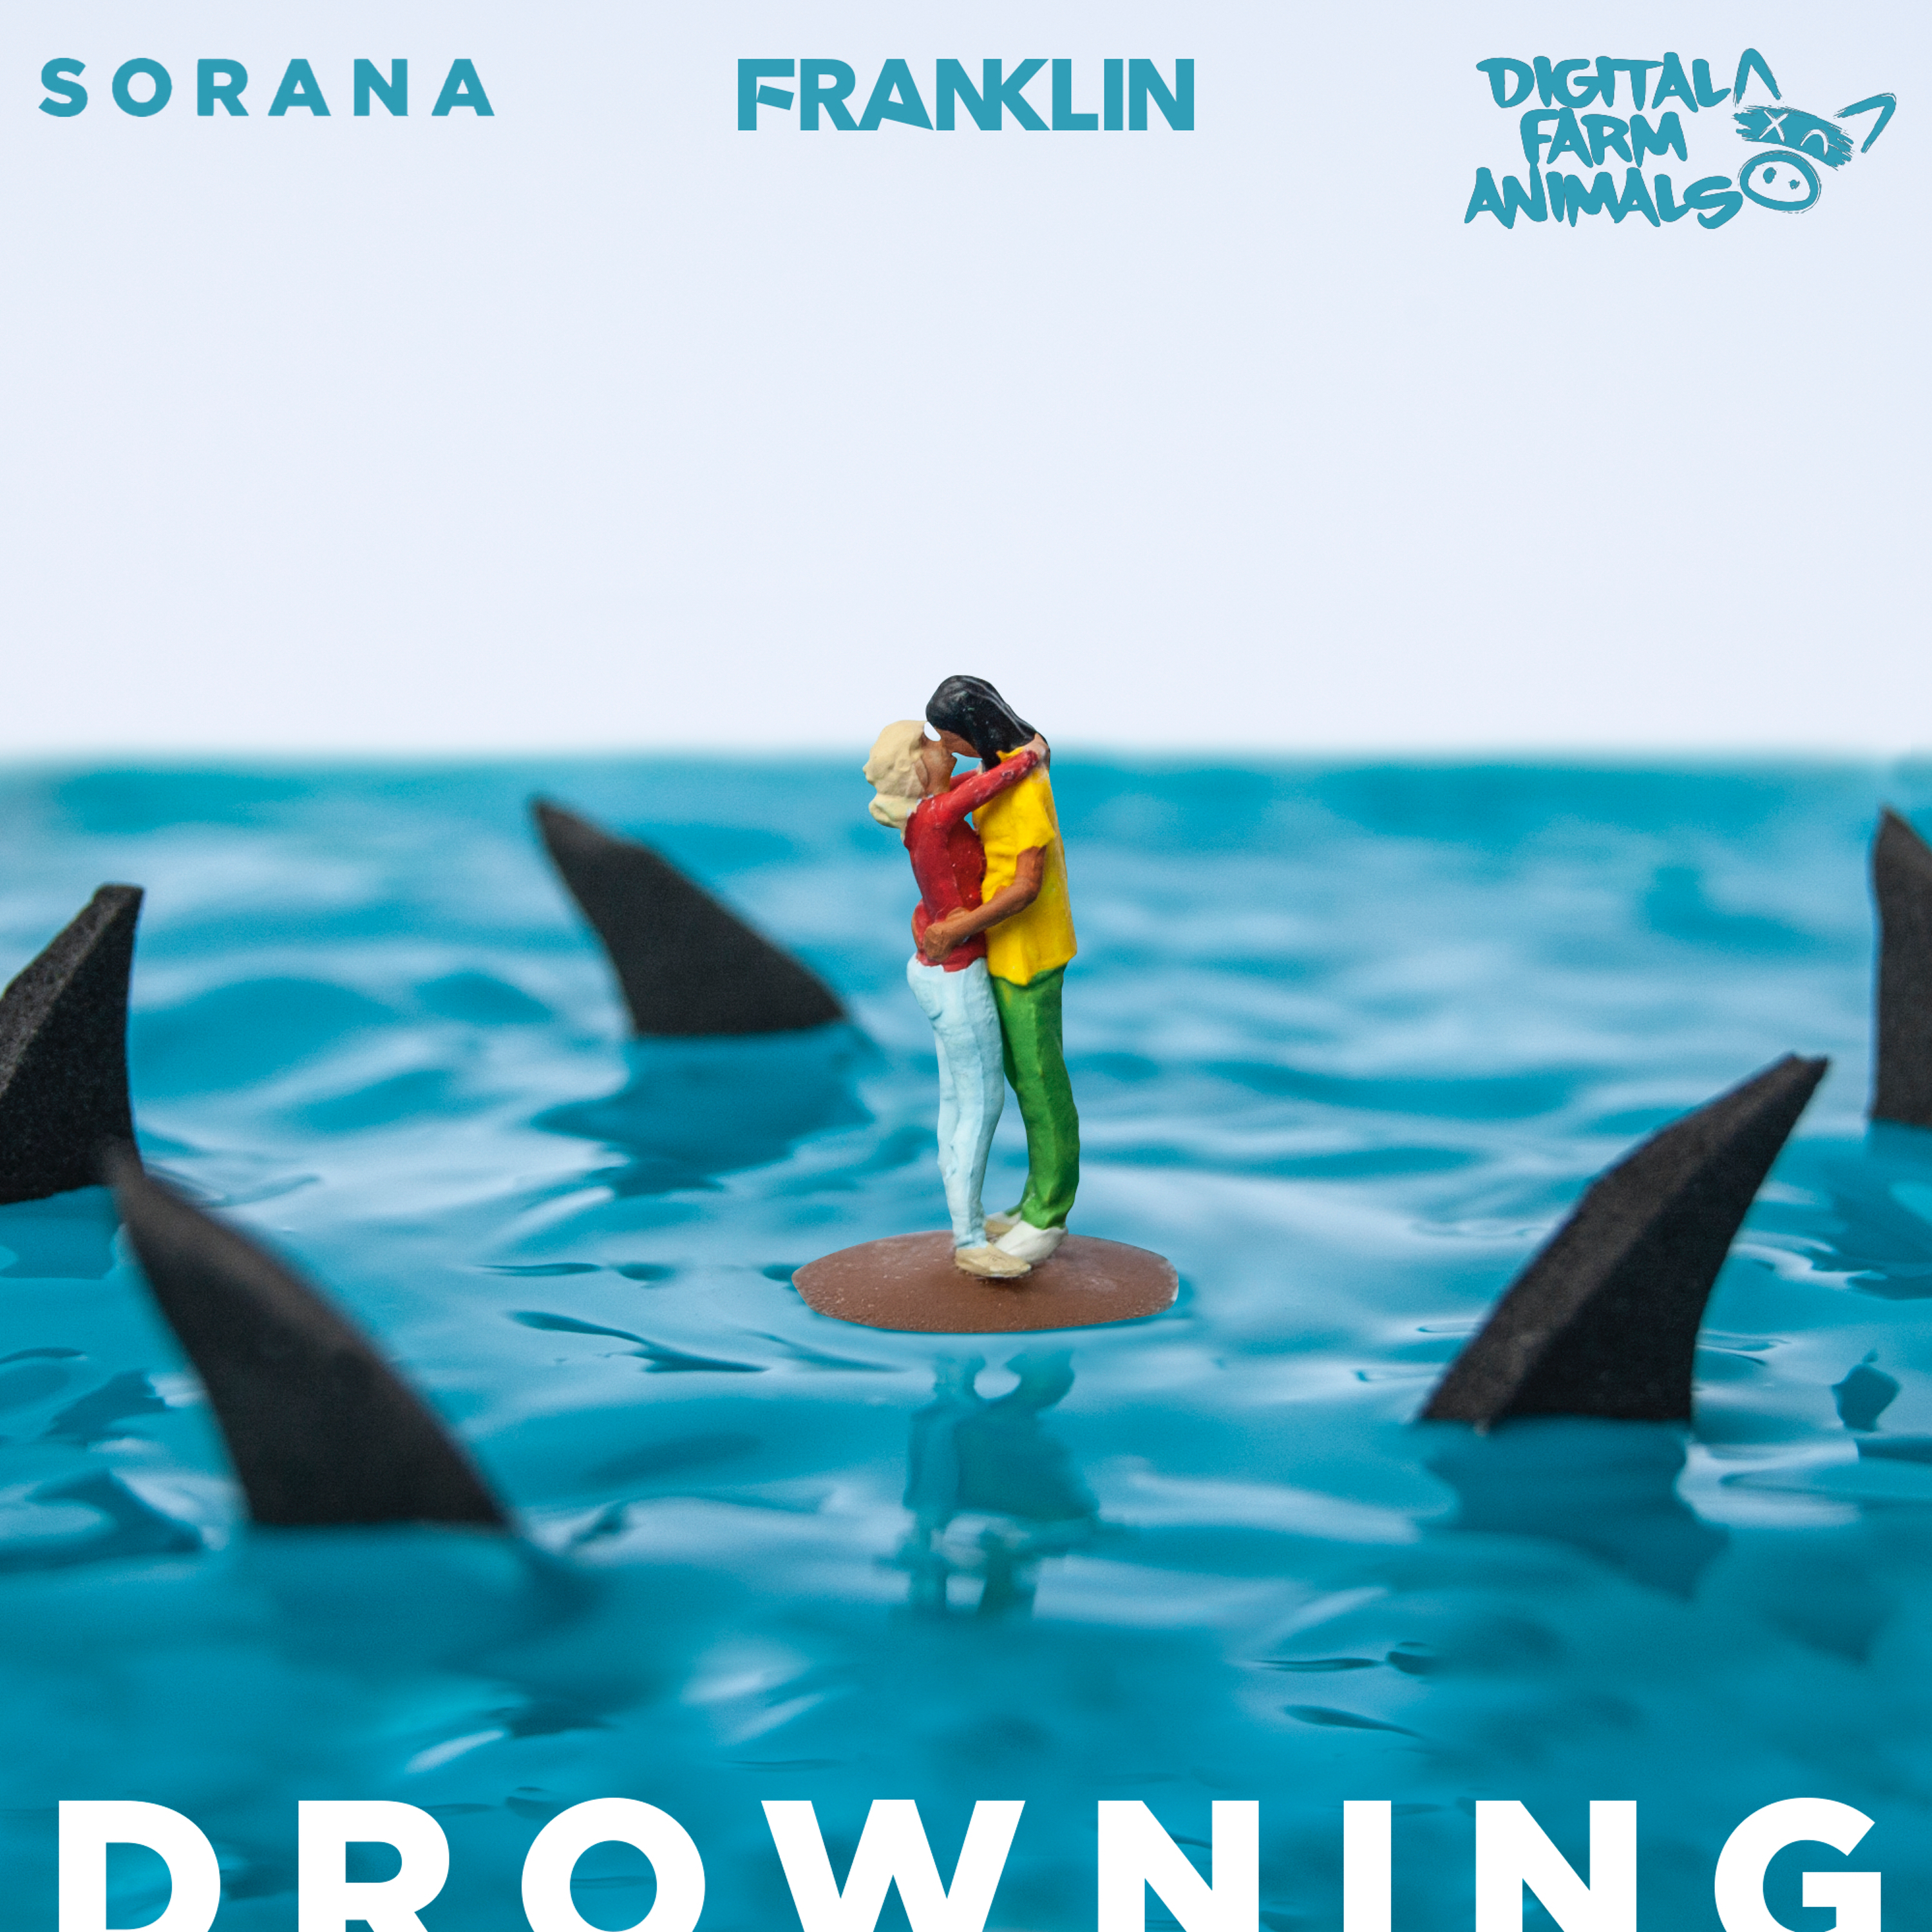 FRANKLIN TEAMS UP WITH DIGITAL FARM ANIMALS AND SORANA TO RELEASE HIS DEBUT SUMMER SINGLE ‘DROWNING’